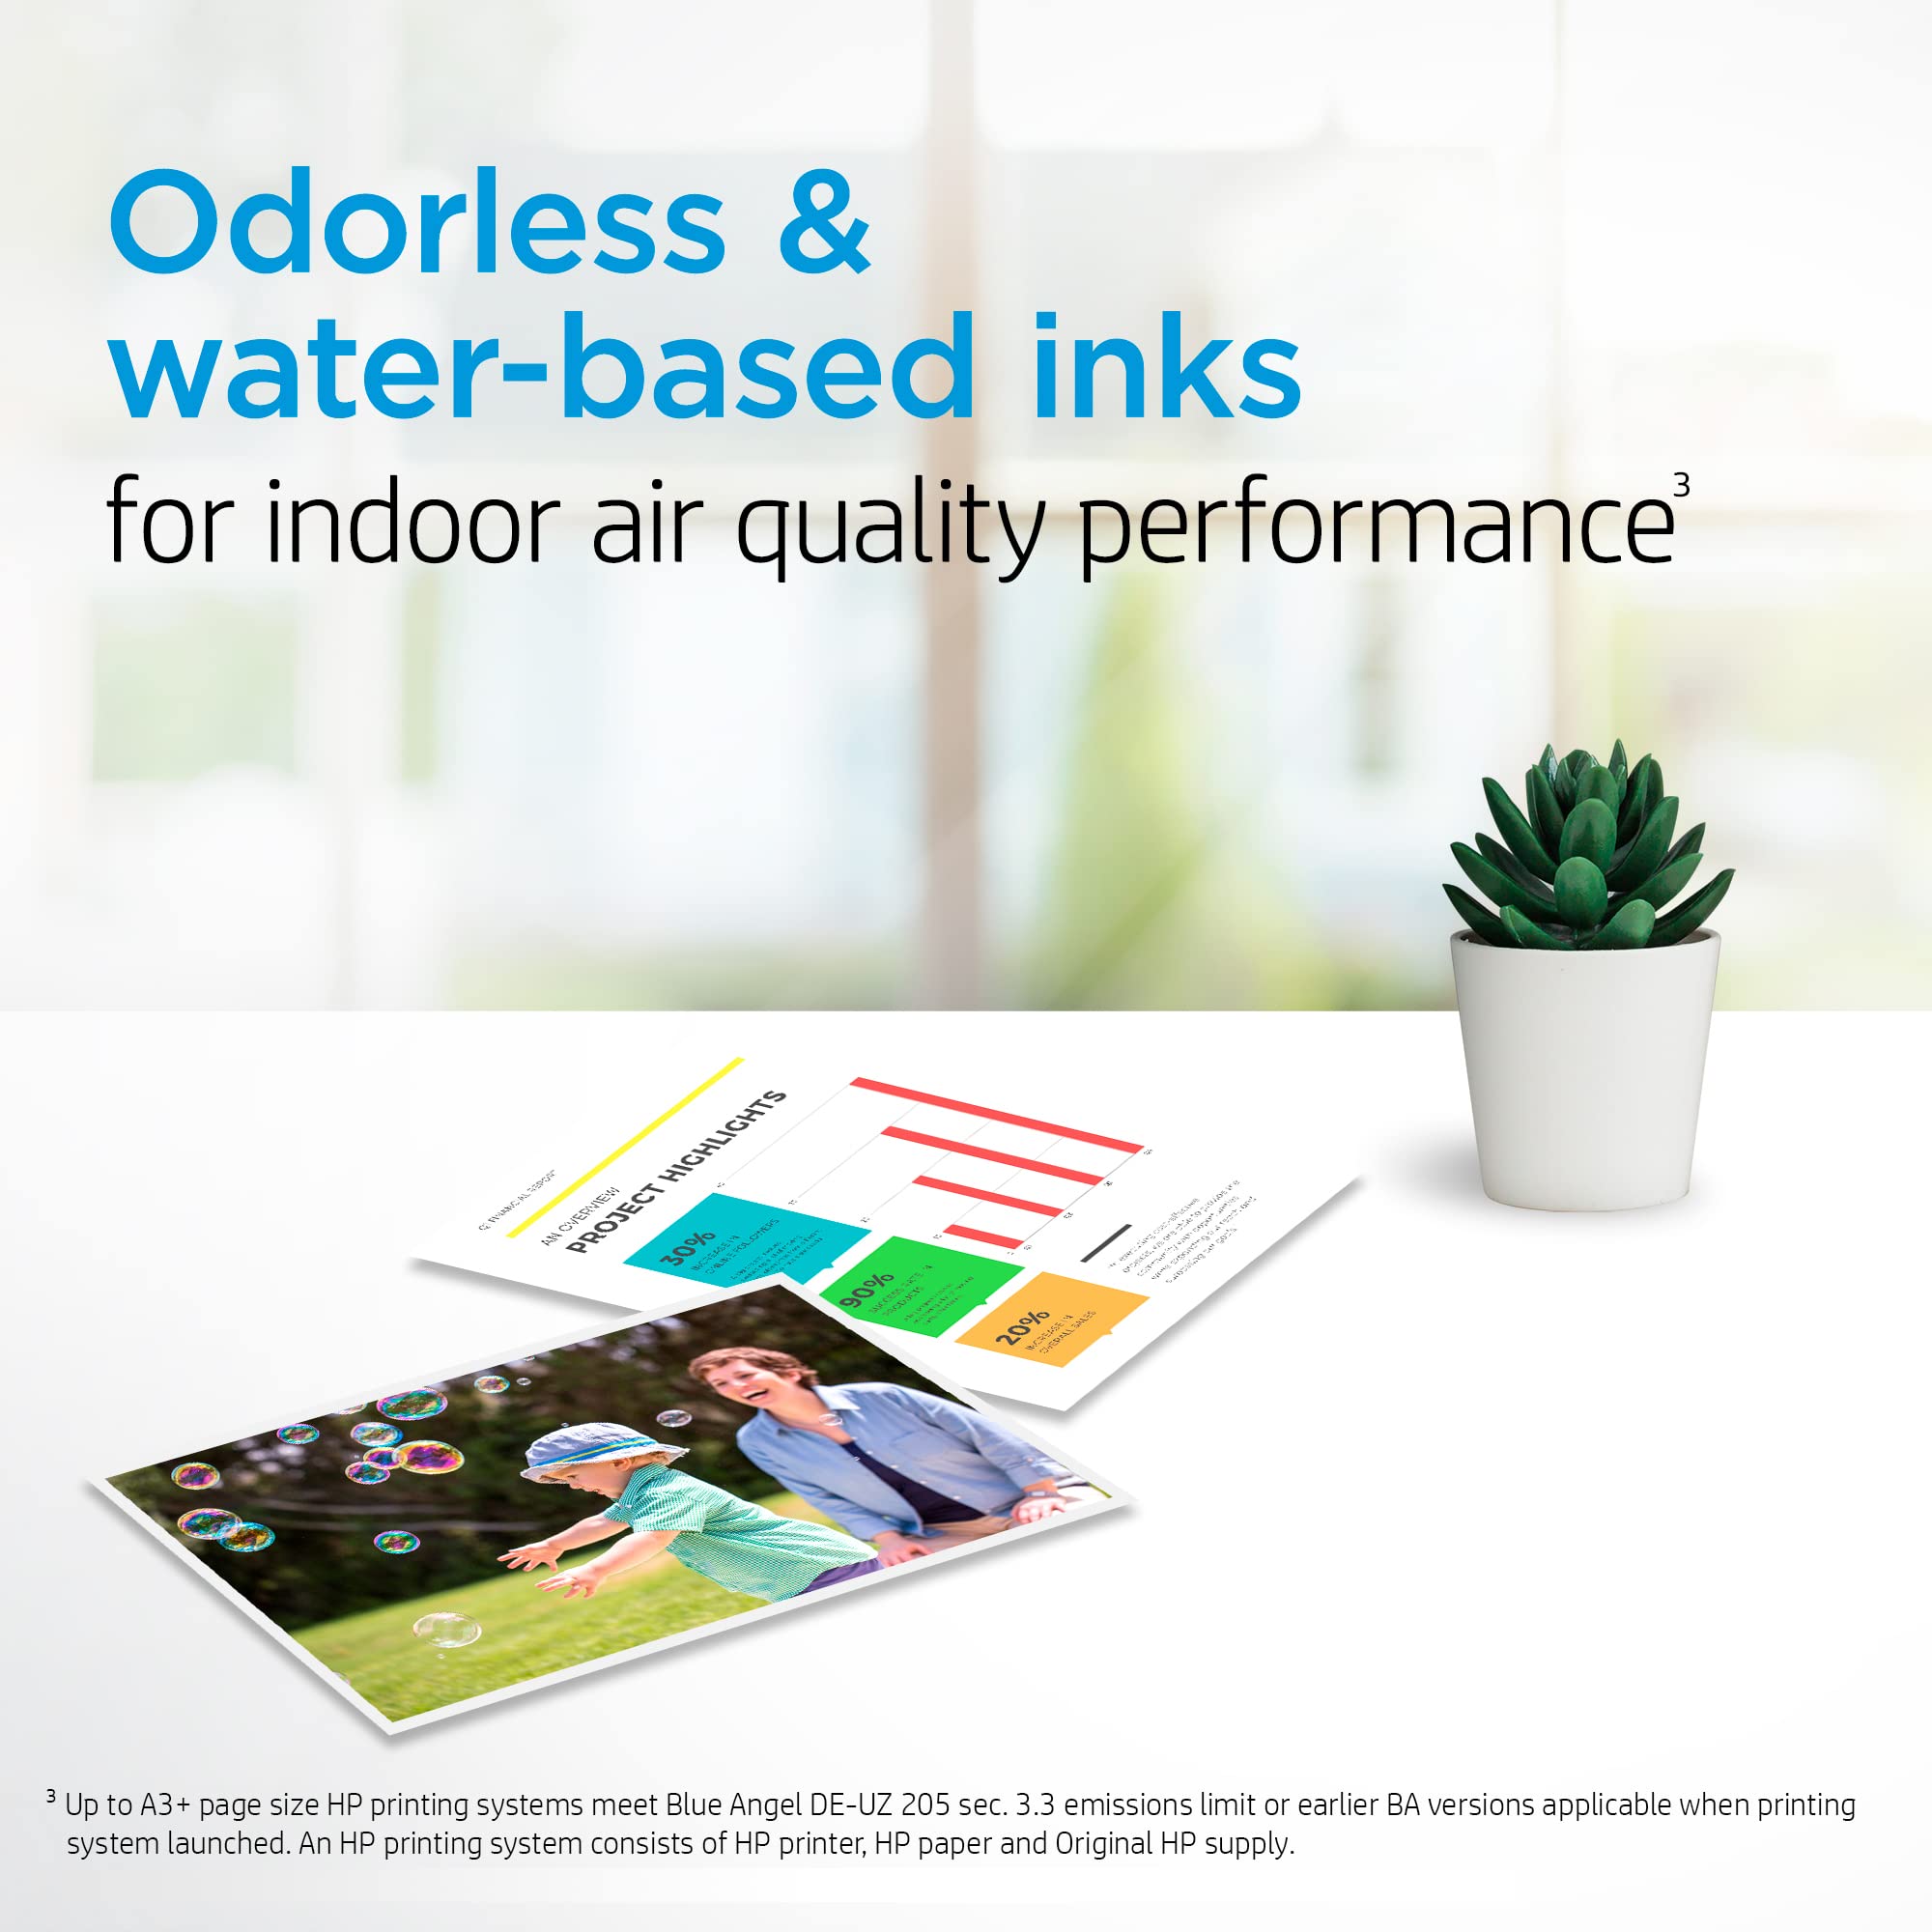 HP 63 Black/Tri-color Ink (2-pack) | Works with HP DeskJet 1112, 2130, 3630 Series; HP ENVY 4510, 4520 Series; HP OfficeJet 3830, 4650, 5200 Series | Eligible for Instant Ink | L0R46AN